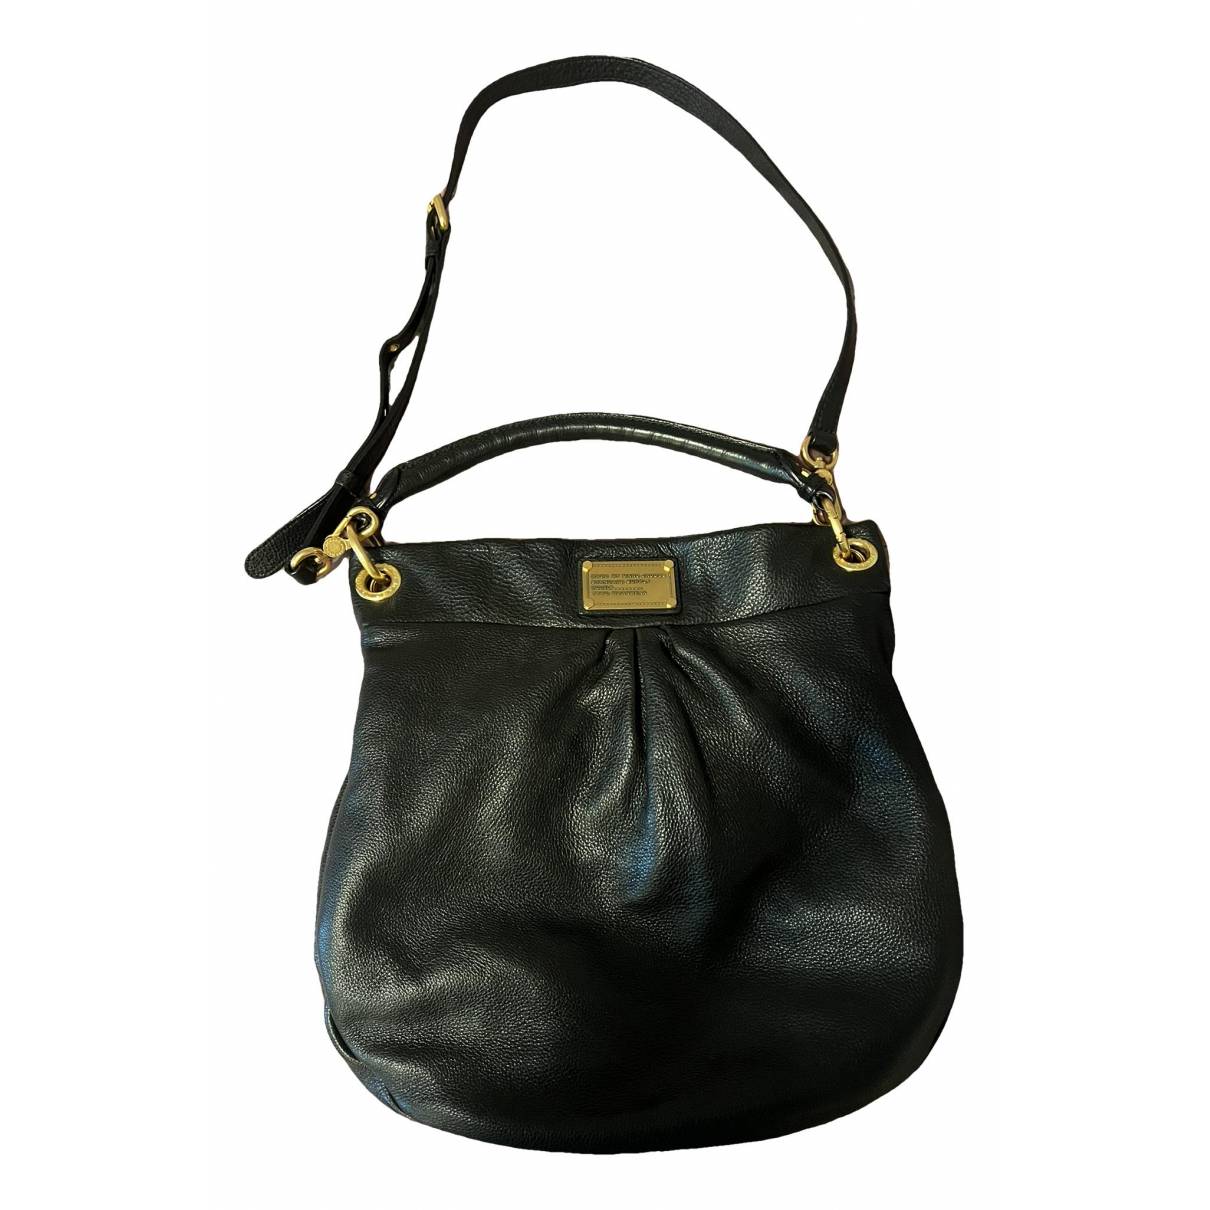 Too hot to handle leather handbag Marc by Marc Jacobs Black in